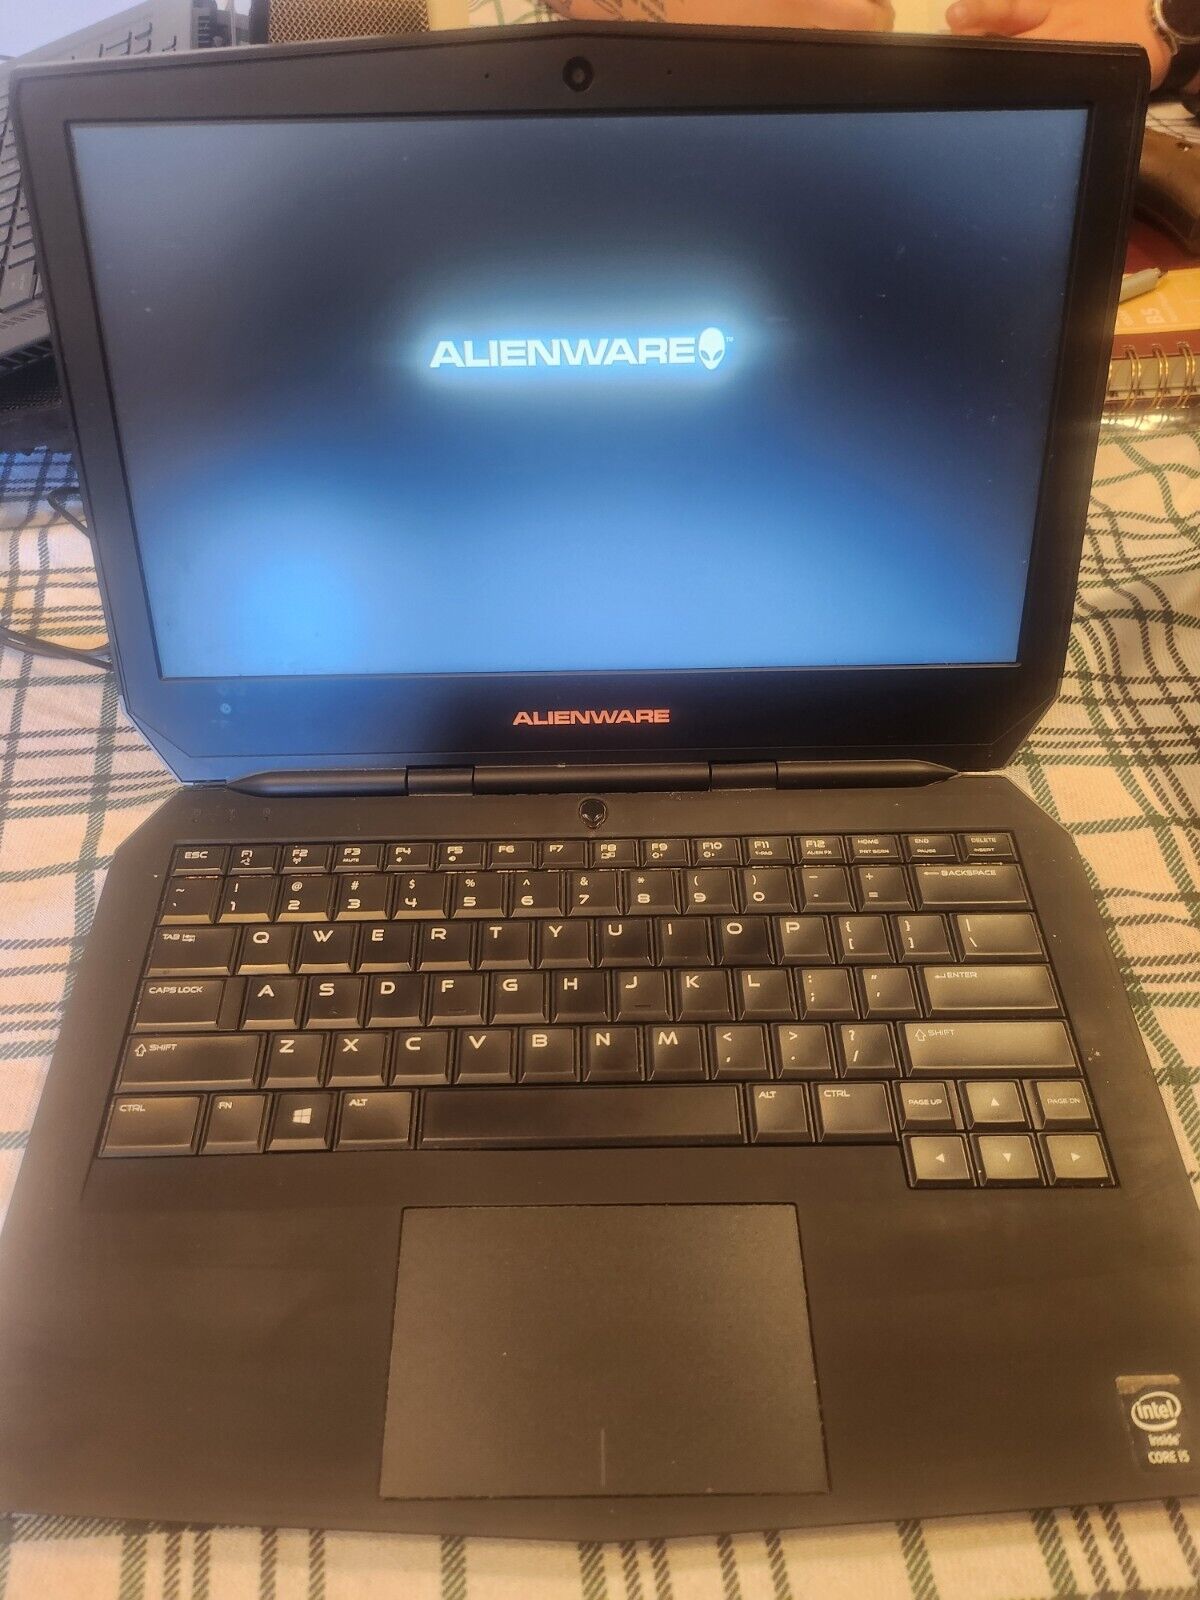 Dell Alienware 13 - Intel i5 Cpu 8GB RAM GTX 960M NO HDD (Charger Included)